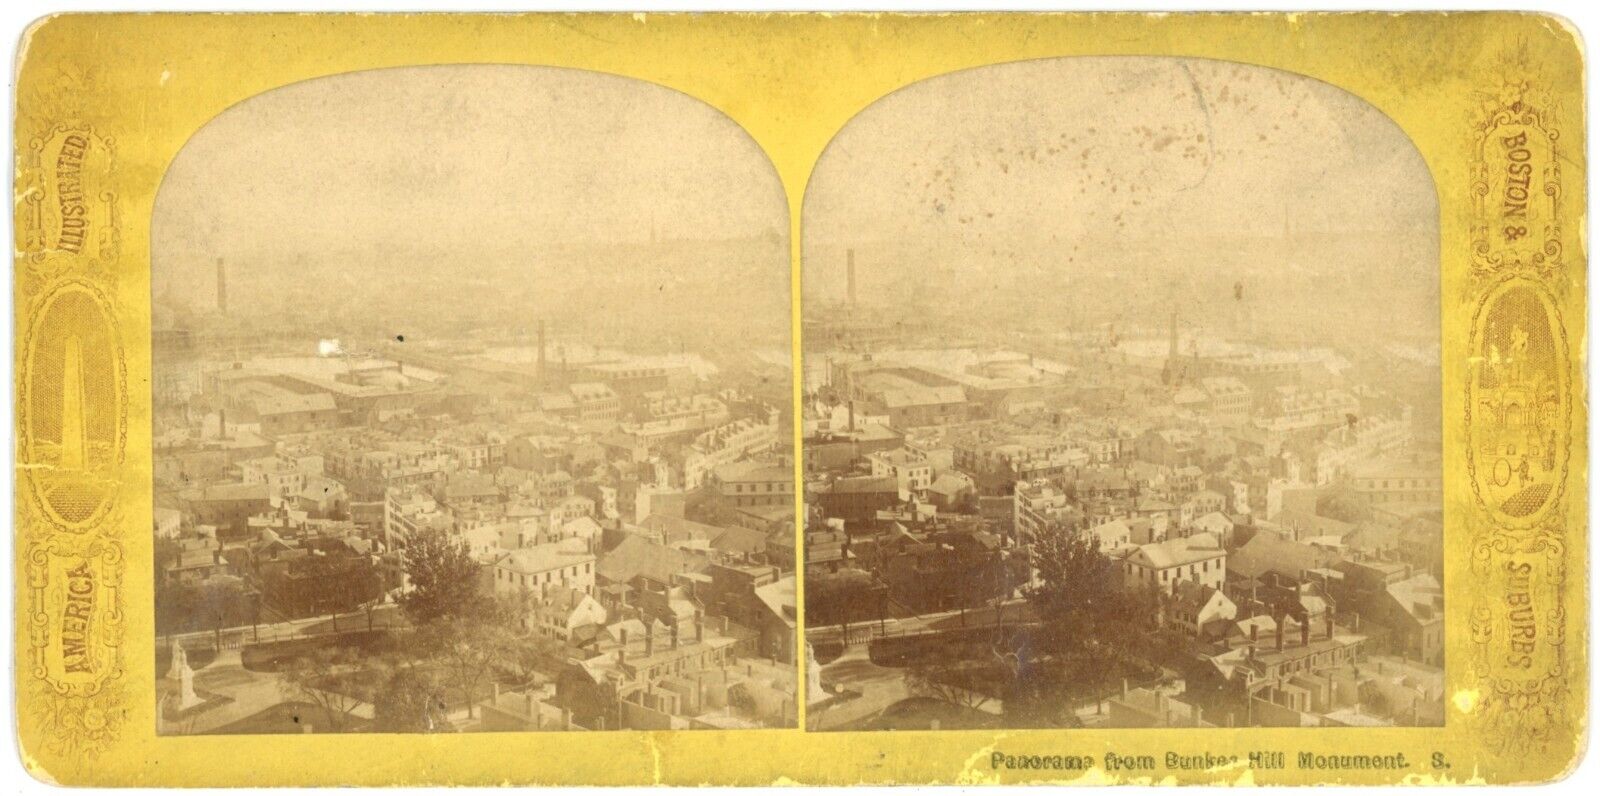 c1900's Real Photo Stereoview Panorama From Bunker Hill Monument Boston MA